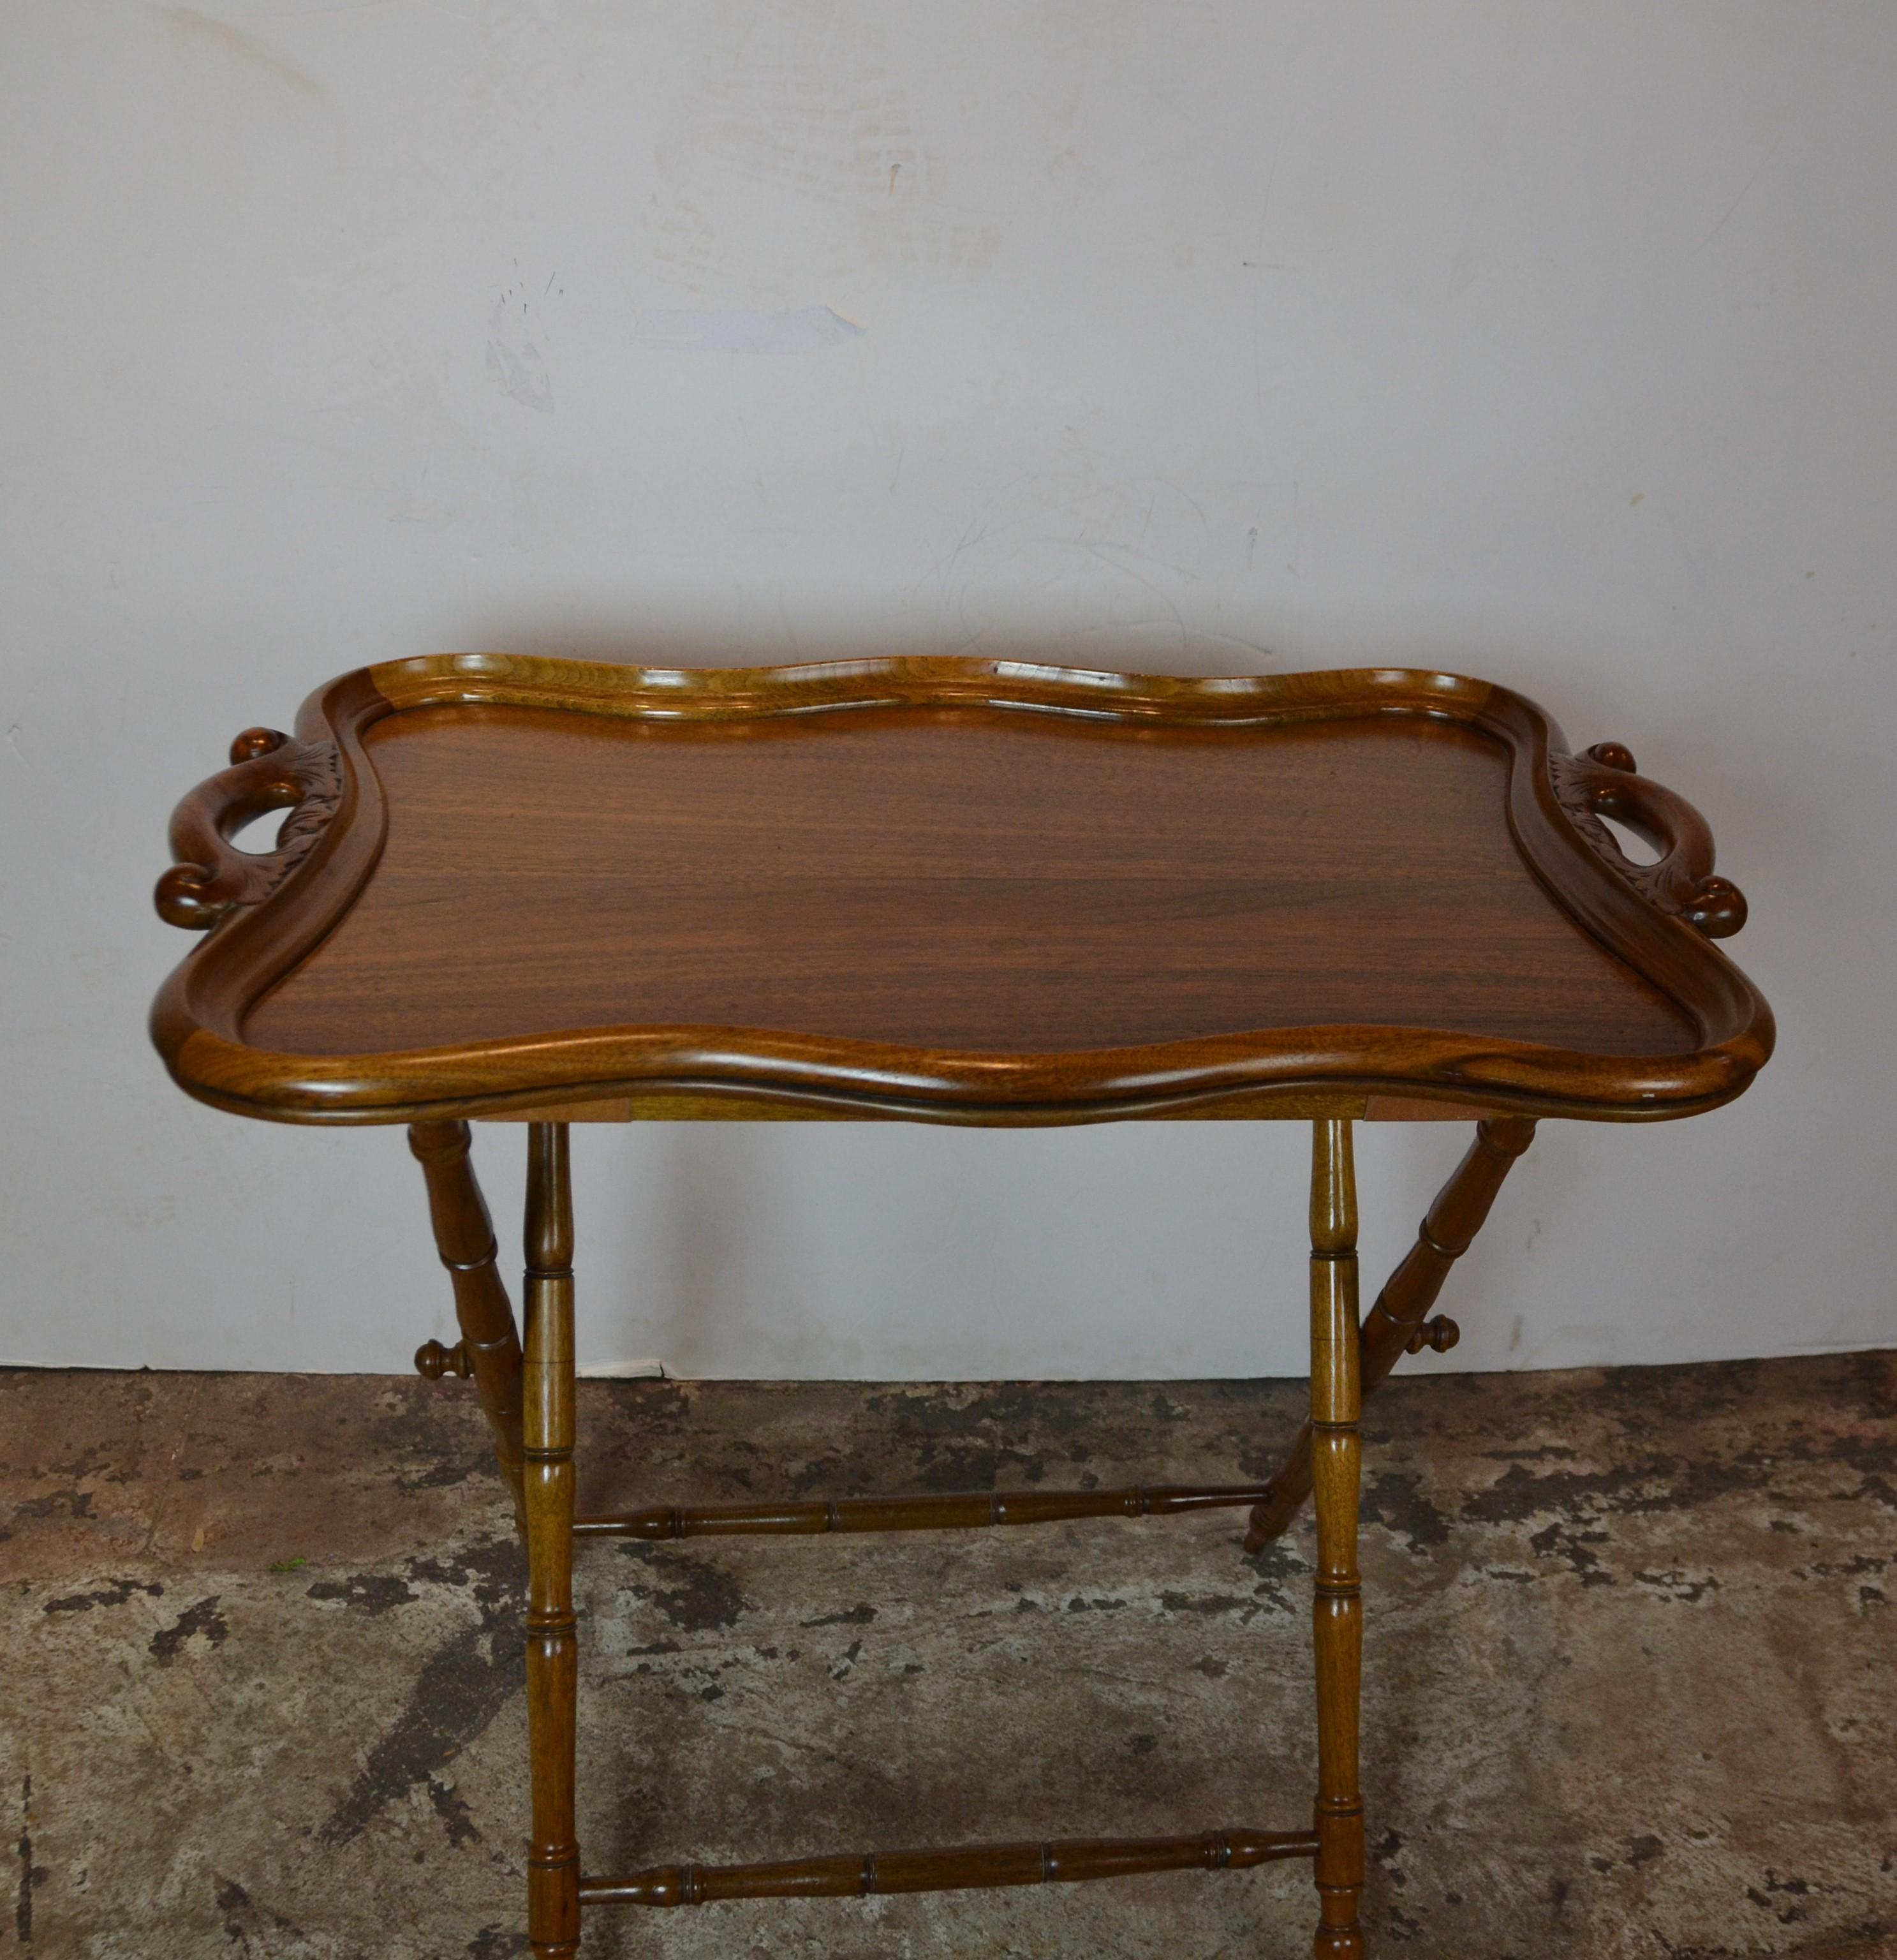 Fine quality walnut tray standing on a folding faux bamboo stand.